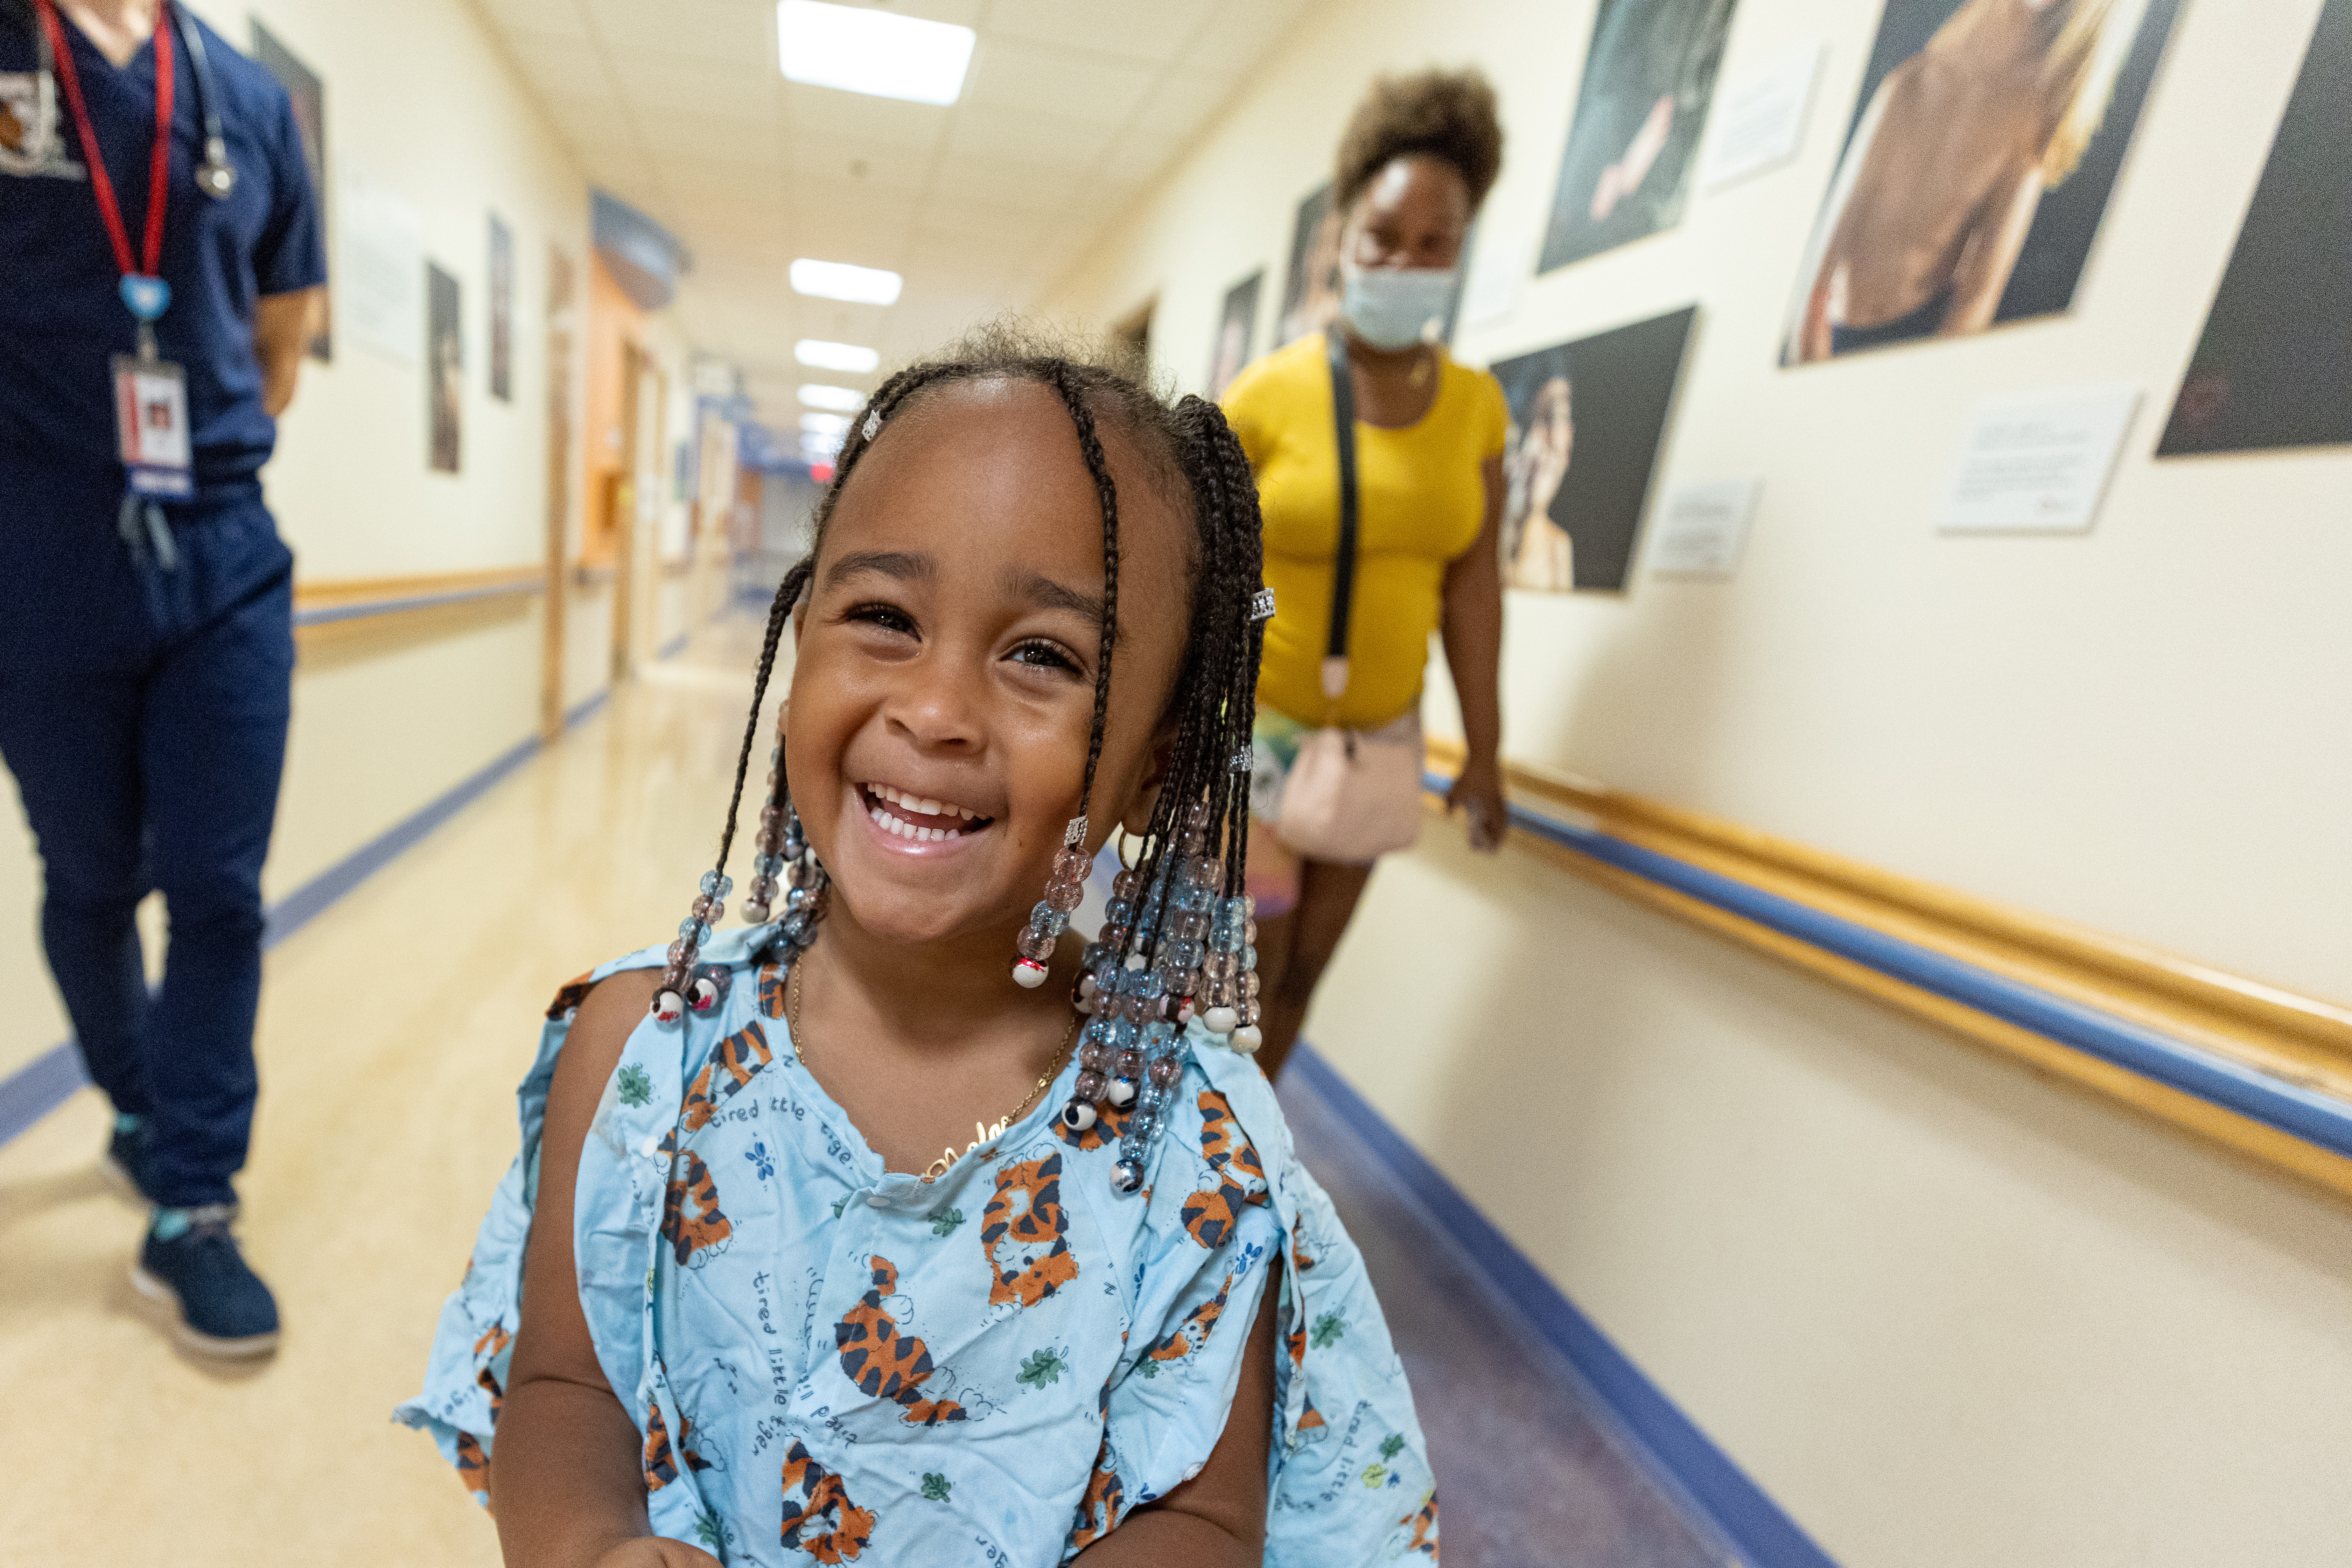 An elementary school aged Black female patient smiles in the hallway at Children't National.